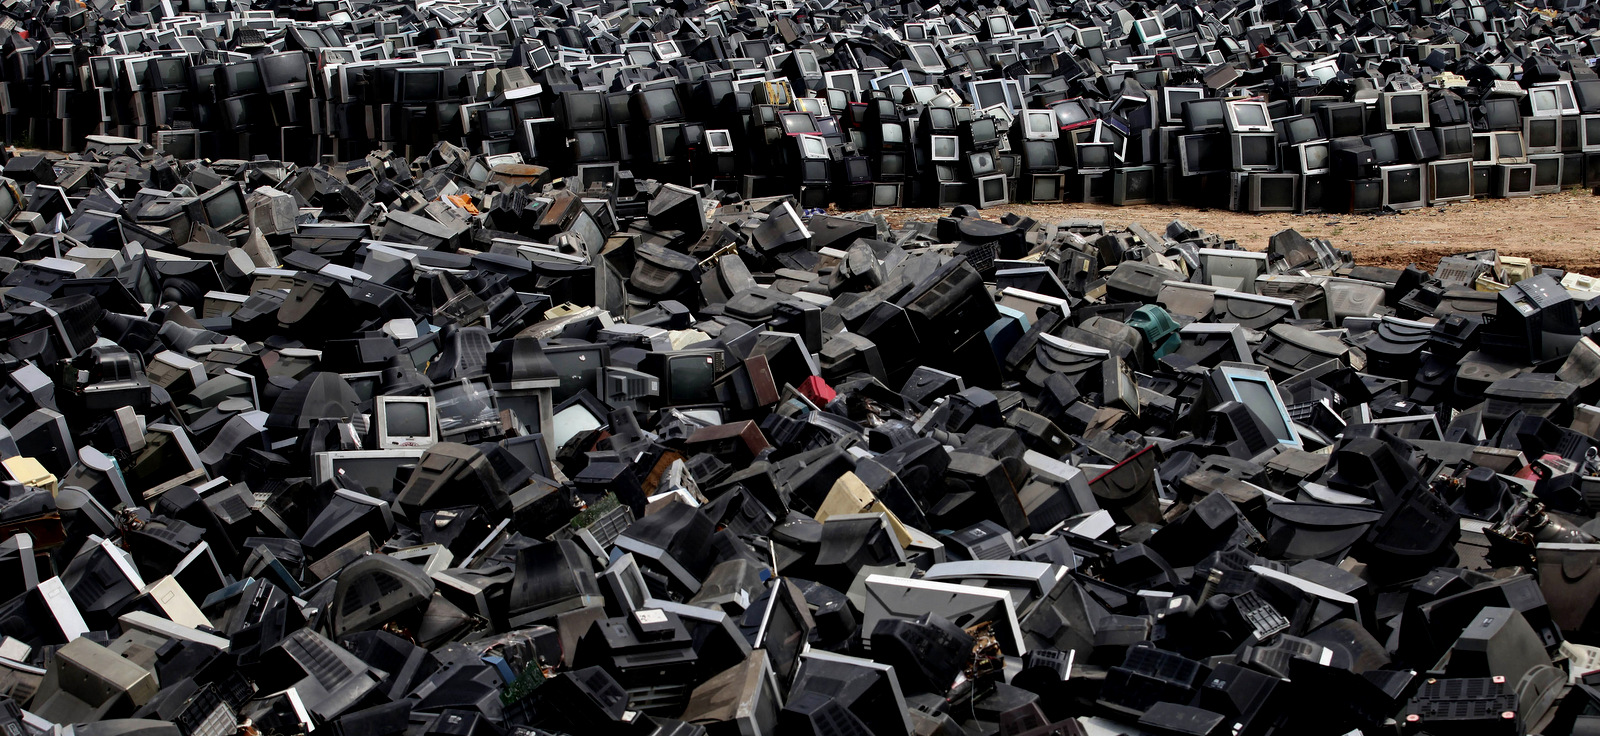 Discarded television sets pile up in a scrap yard awaiting recycling in Zhuzhou city in south China's Hunan province. (AP Photo)